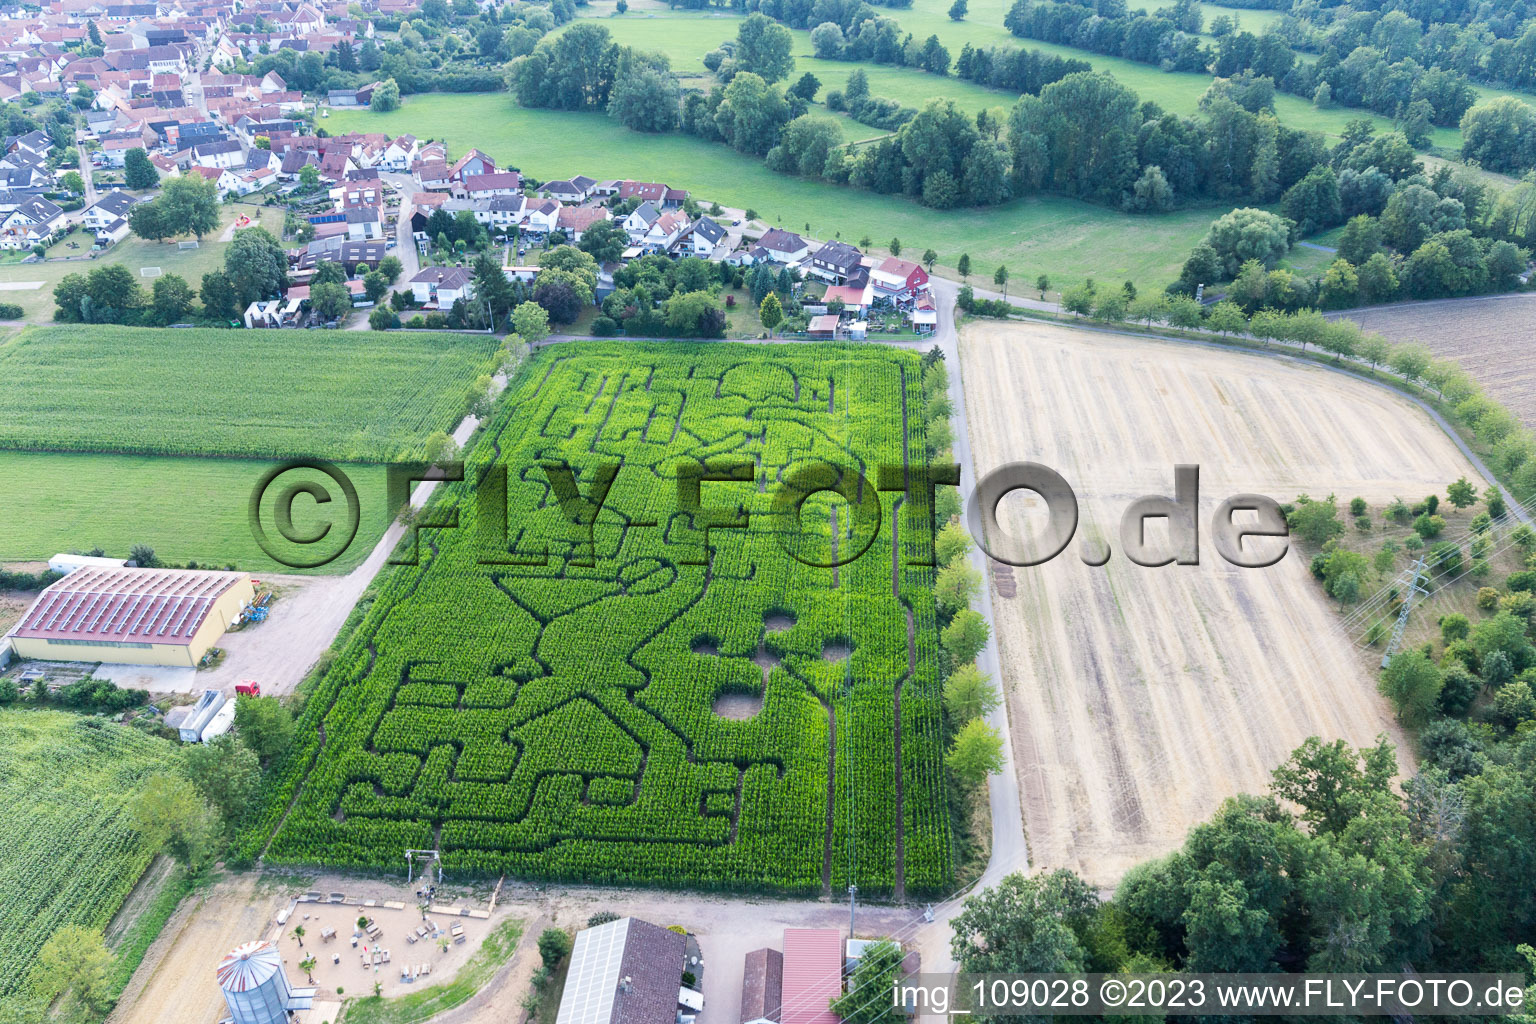 Corn maze at Seehof in Steinweiler in the state Rhineland-Palatinate, Germany from the plane